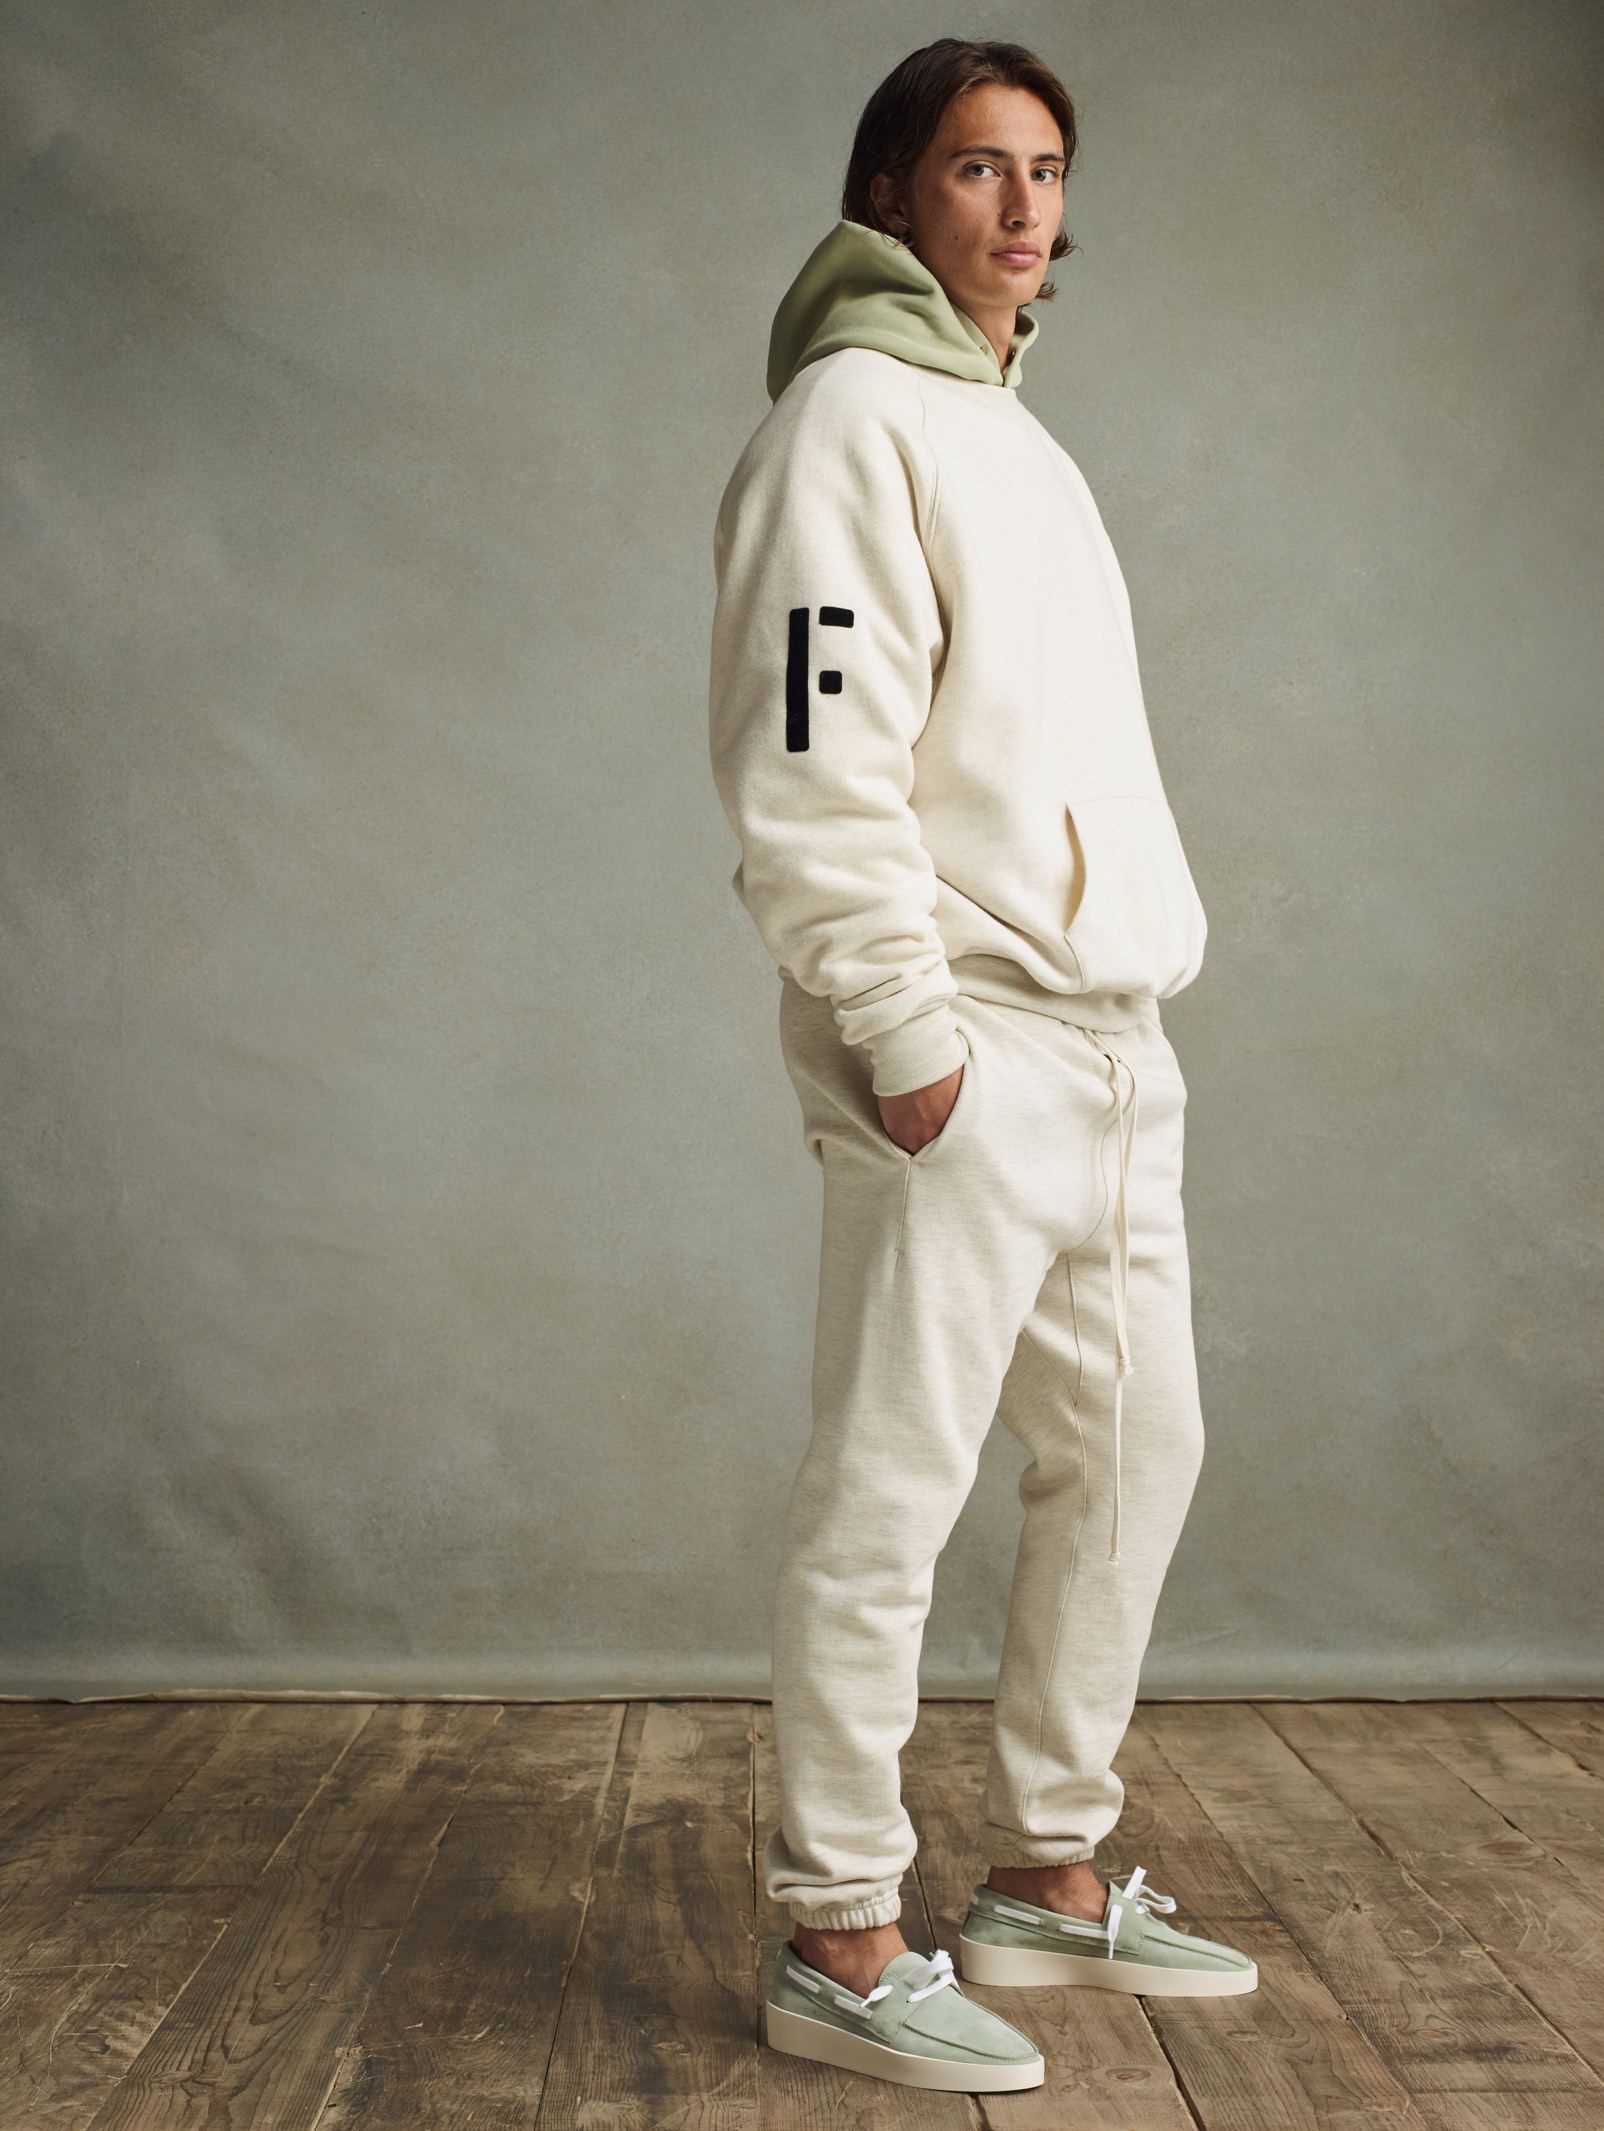 Fear Of God - Seventh Collection Lookbook